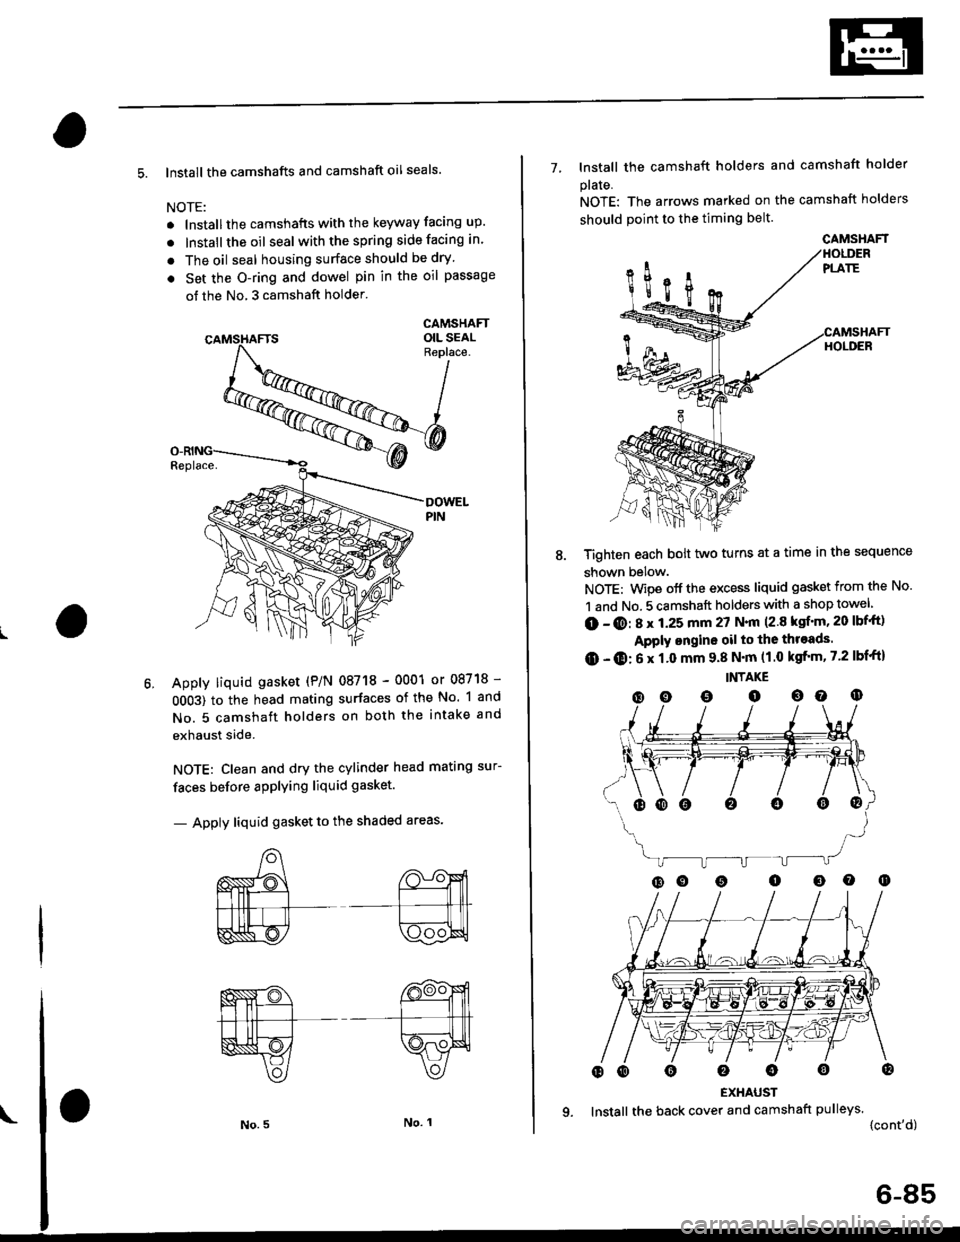 HONDA CIVIC 2000 6.G Workshop Manual 5. lnstall the camshafts and camshaft oil seals.
NOTE:
. lnstallthe camshafts with the keyway facing up.
. lnstall the oil seal withthespring side facing in.
. The oil seal housing surface should be d